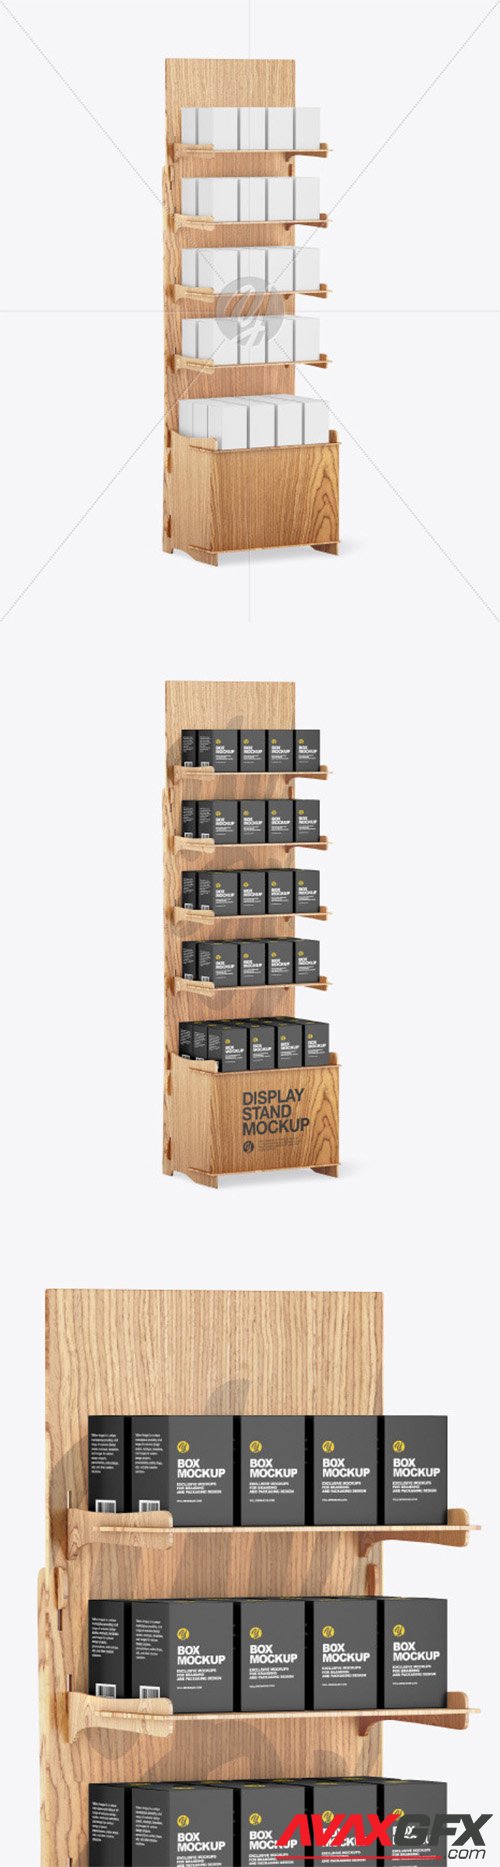 Wooden Display Stand w/ Boxes Mockup 86144 TIF